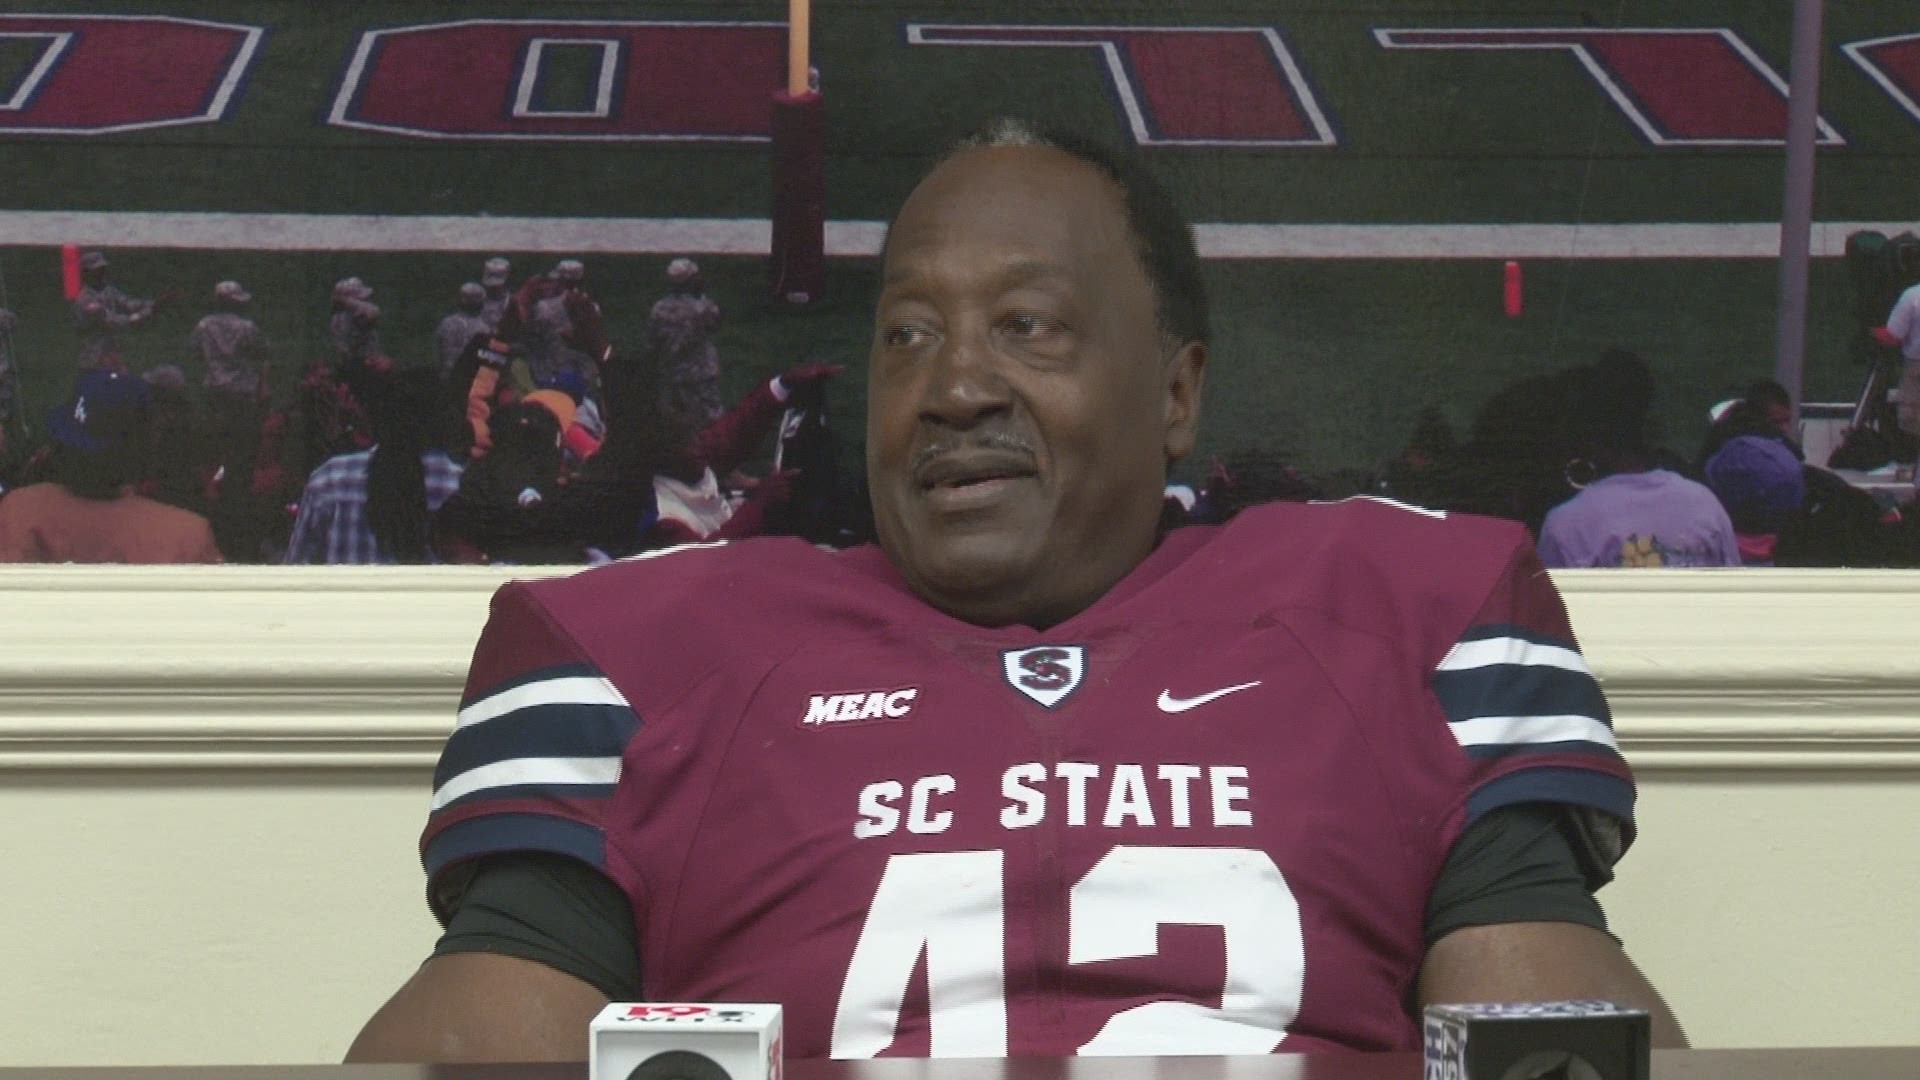 South Carolina State Bulldog Joe Thomas Sr talks about the experience of becoming the oldest person to play Division I football. He's 55 years old.